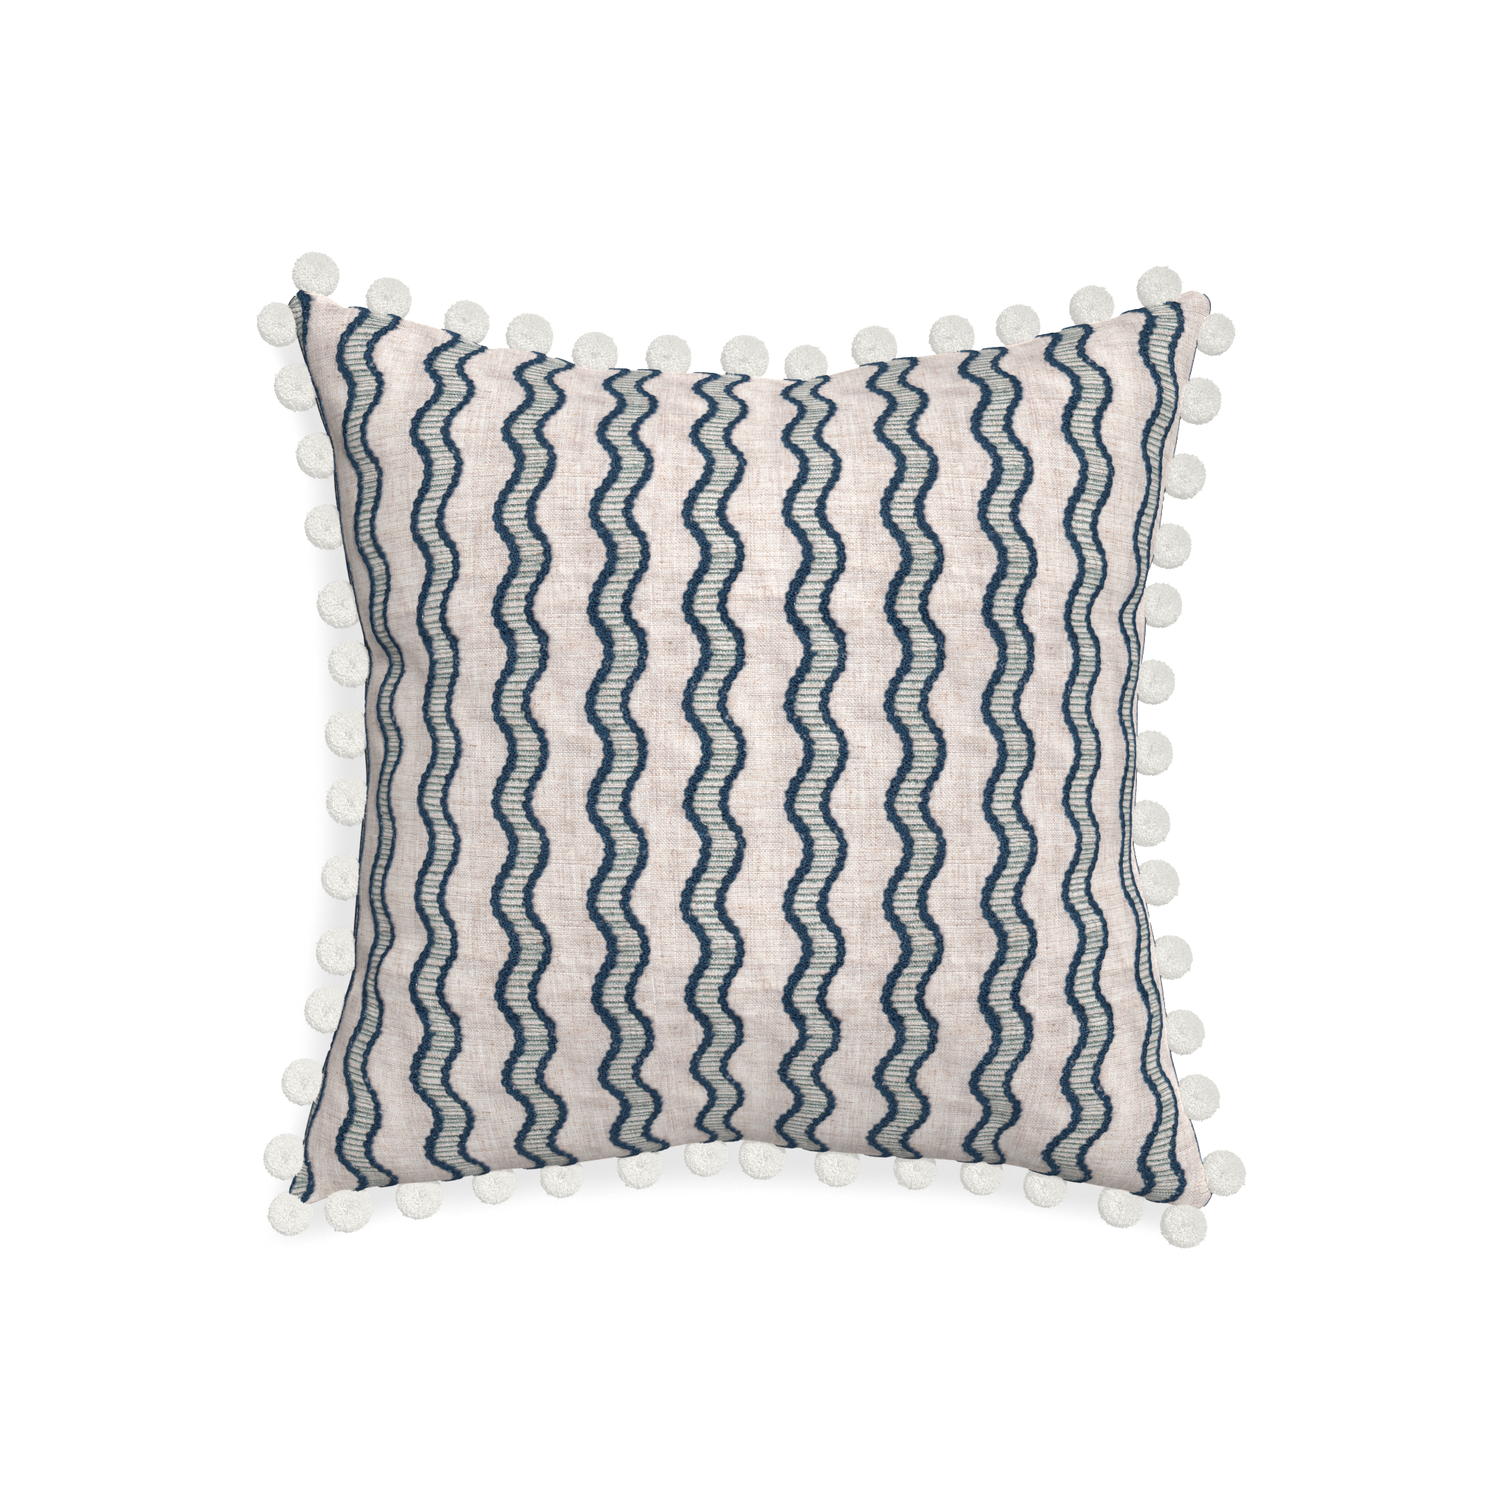 20-square beatrice custom embroidered wavepillow with snow pom pom on white background